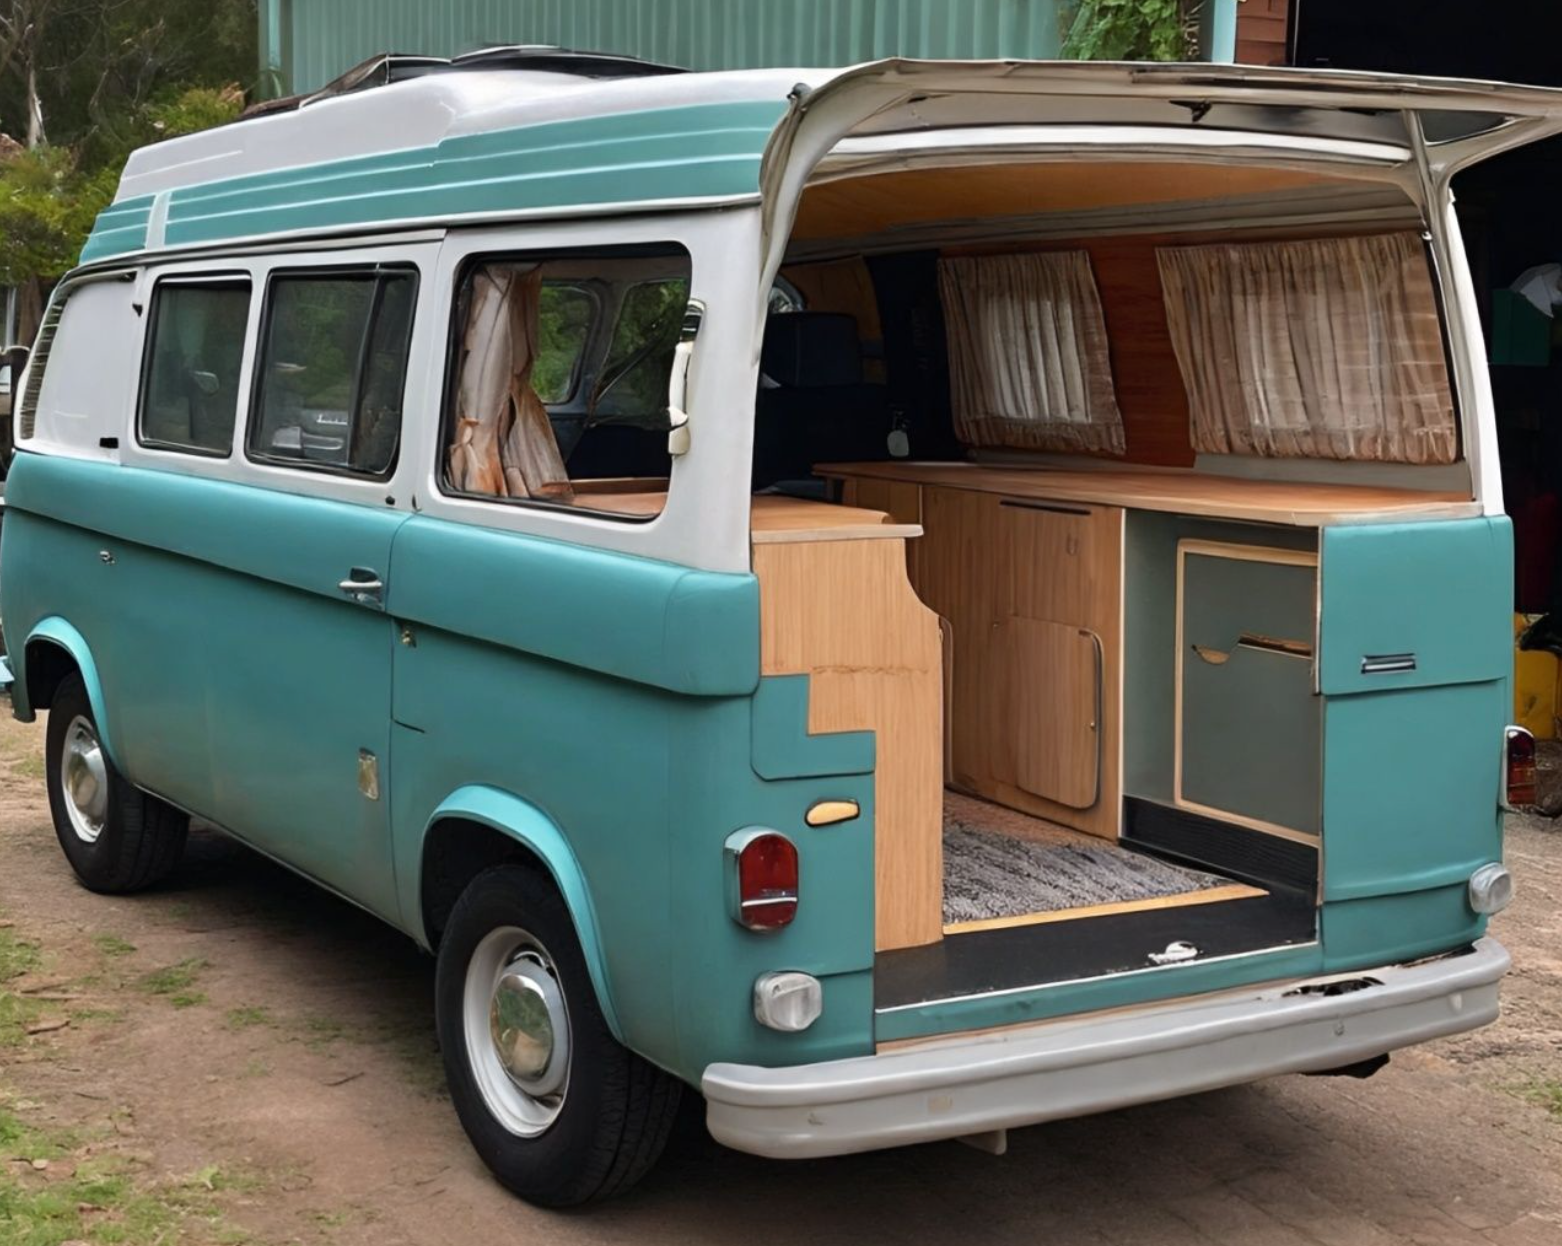 Choosing the Right Interior Layout for Your Campervan Conversion: Dinette vs. Platform Bed